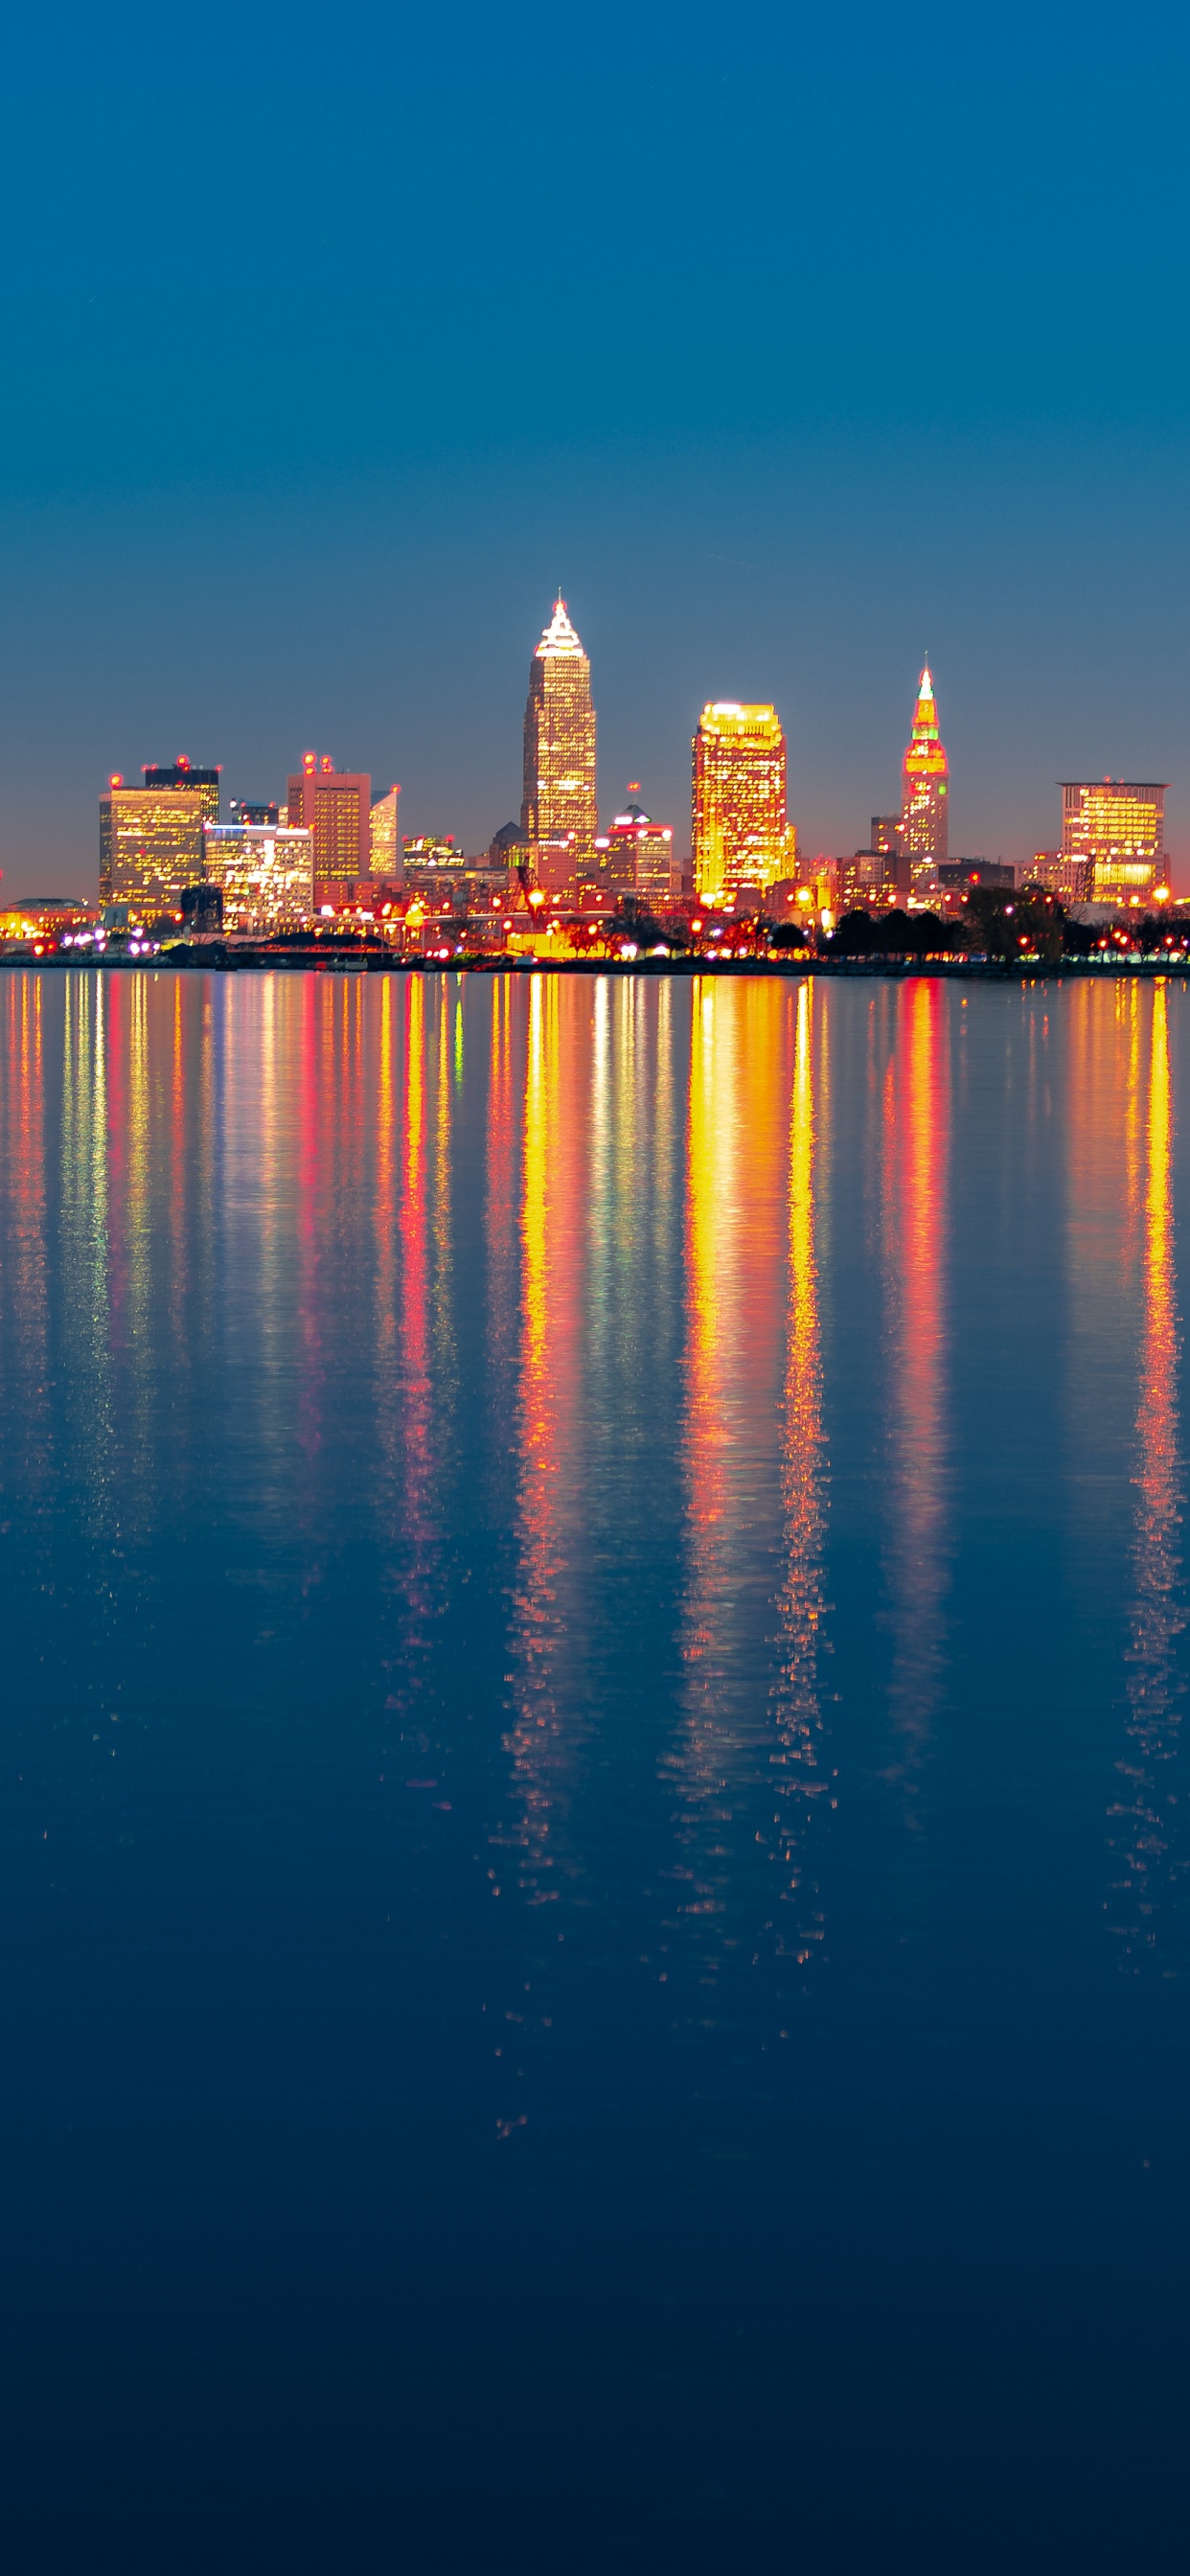 City Skyline Across Body of Water During Night Time. Wallpaper in 1242x2688 Resolution